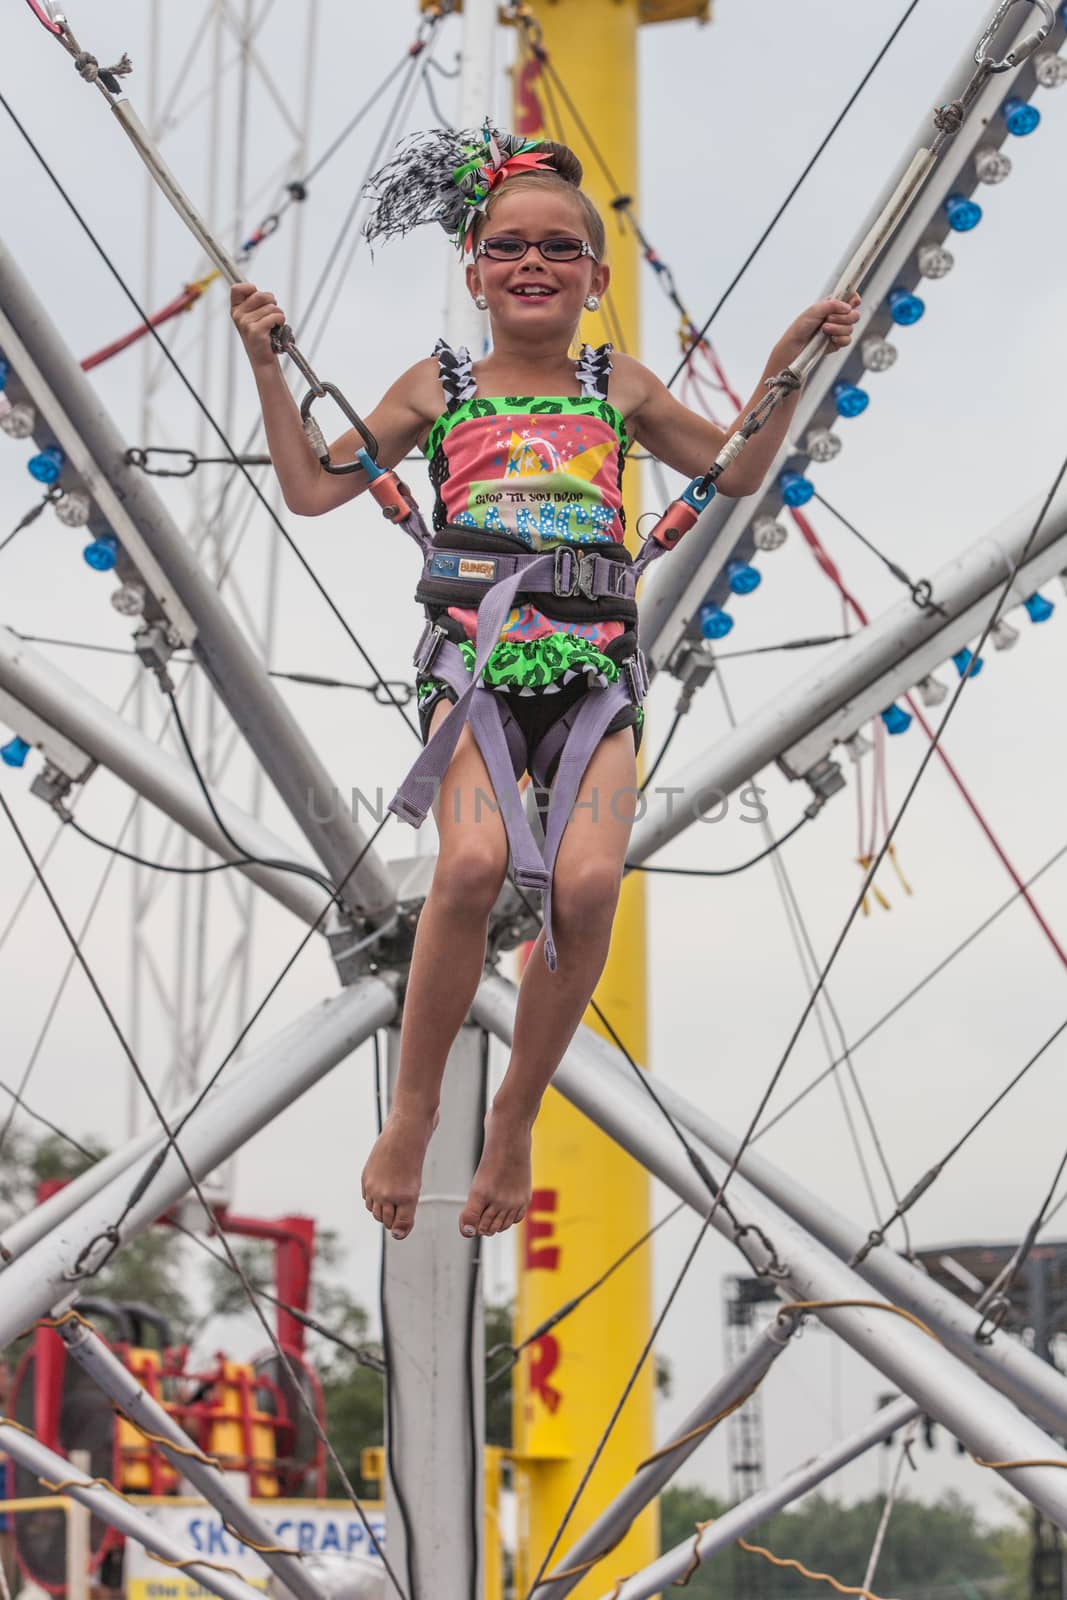 DES MOINES, IA /USA - AUGUST 10: Attendees at the Unidentified girl on carnival jumping apparatus at the Iowa State Fair on August 10, 2014 in Des Moines, Iowa, USA.